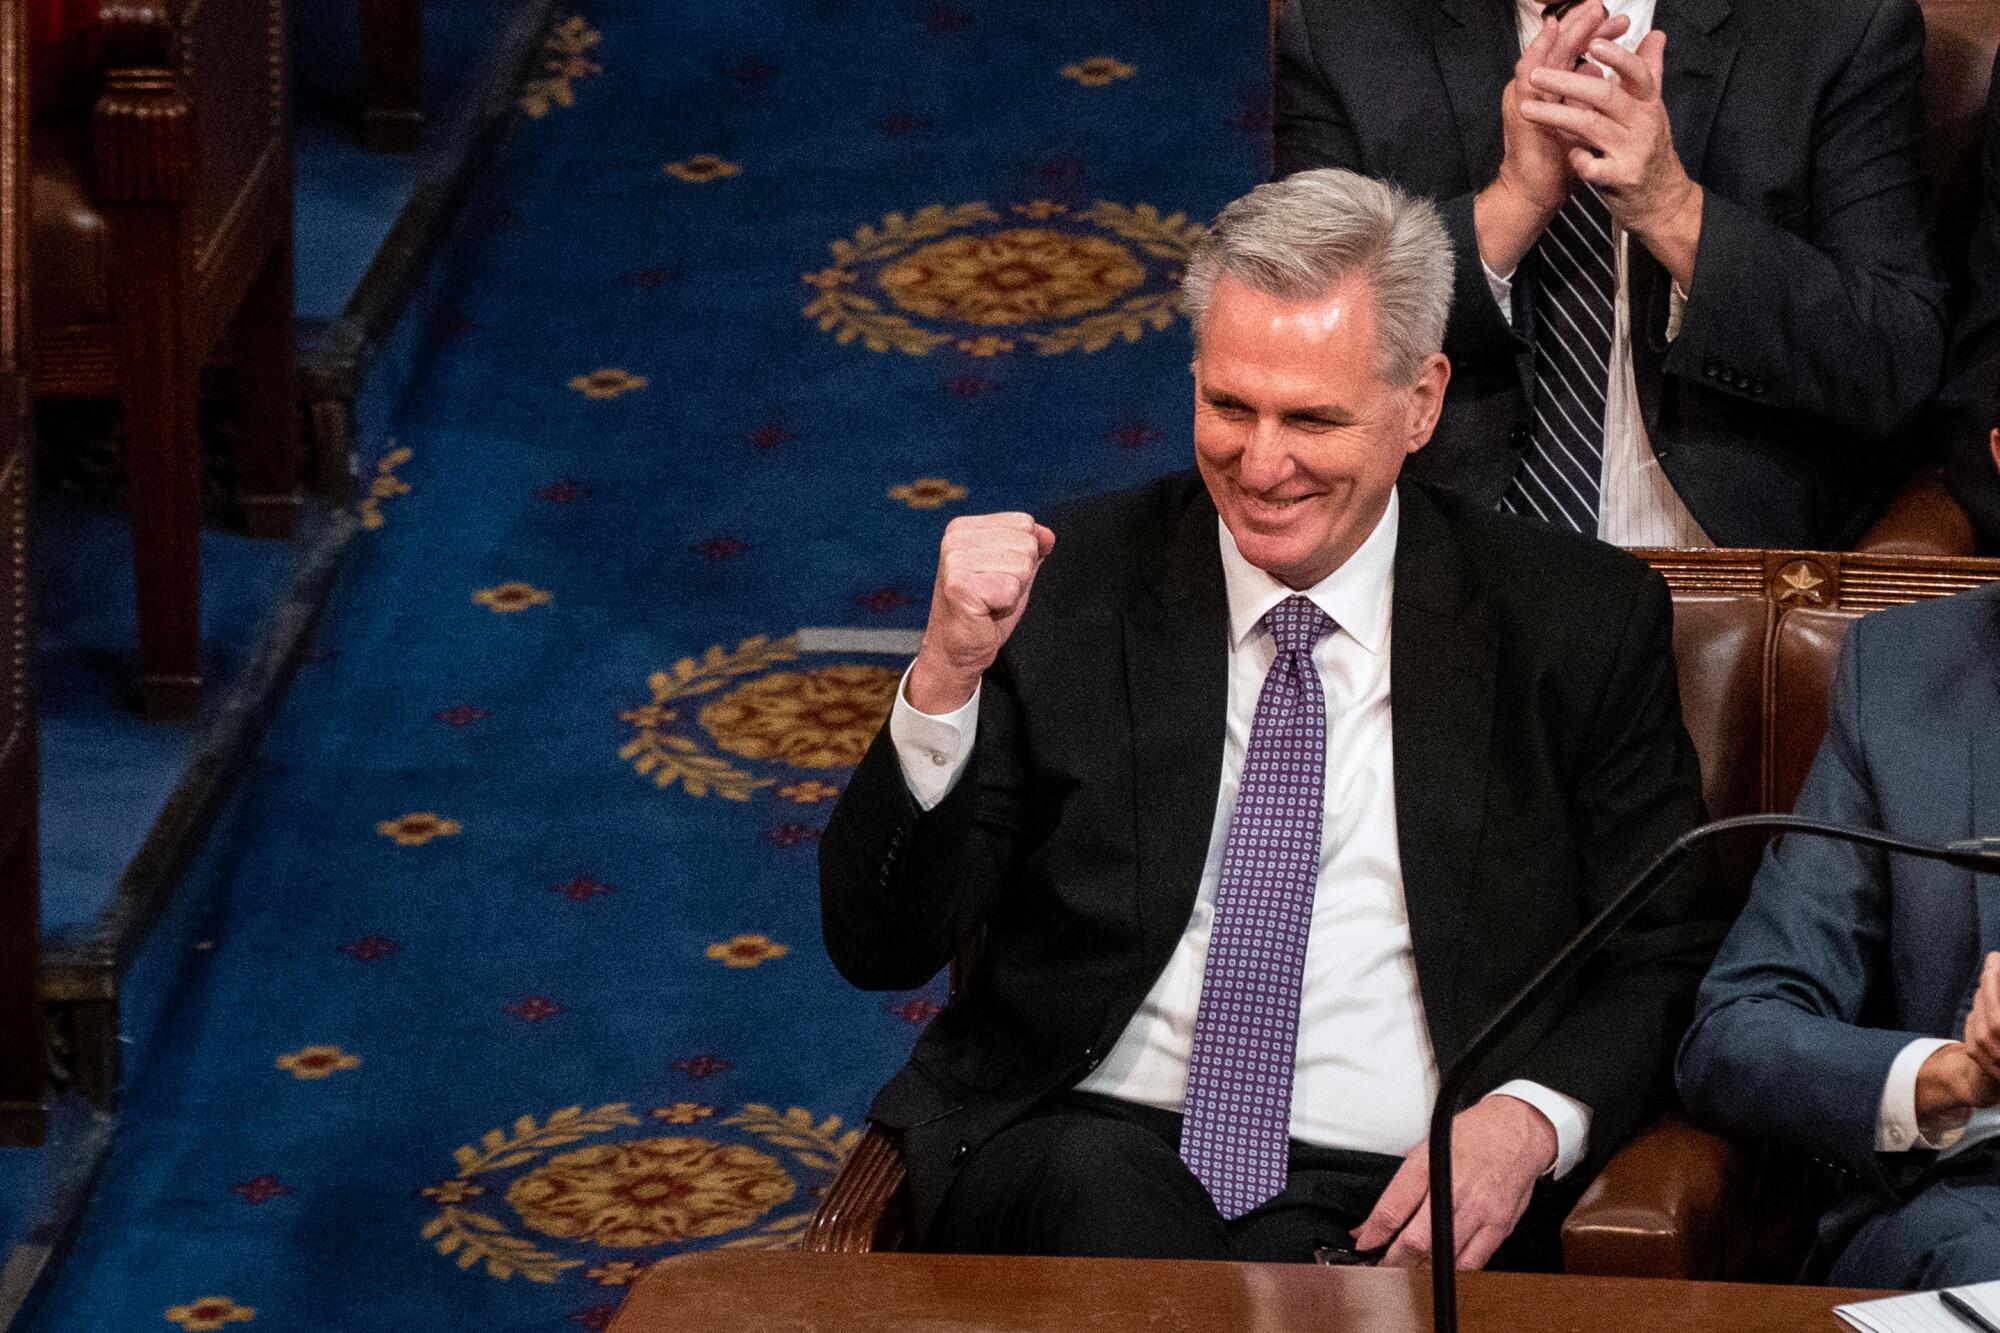 Kevin McCarthy pumping his fist as he sits in the House chamber.